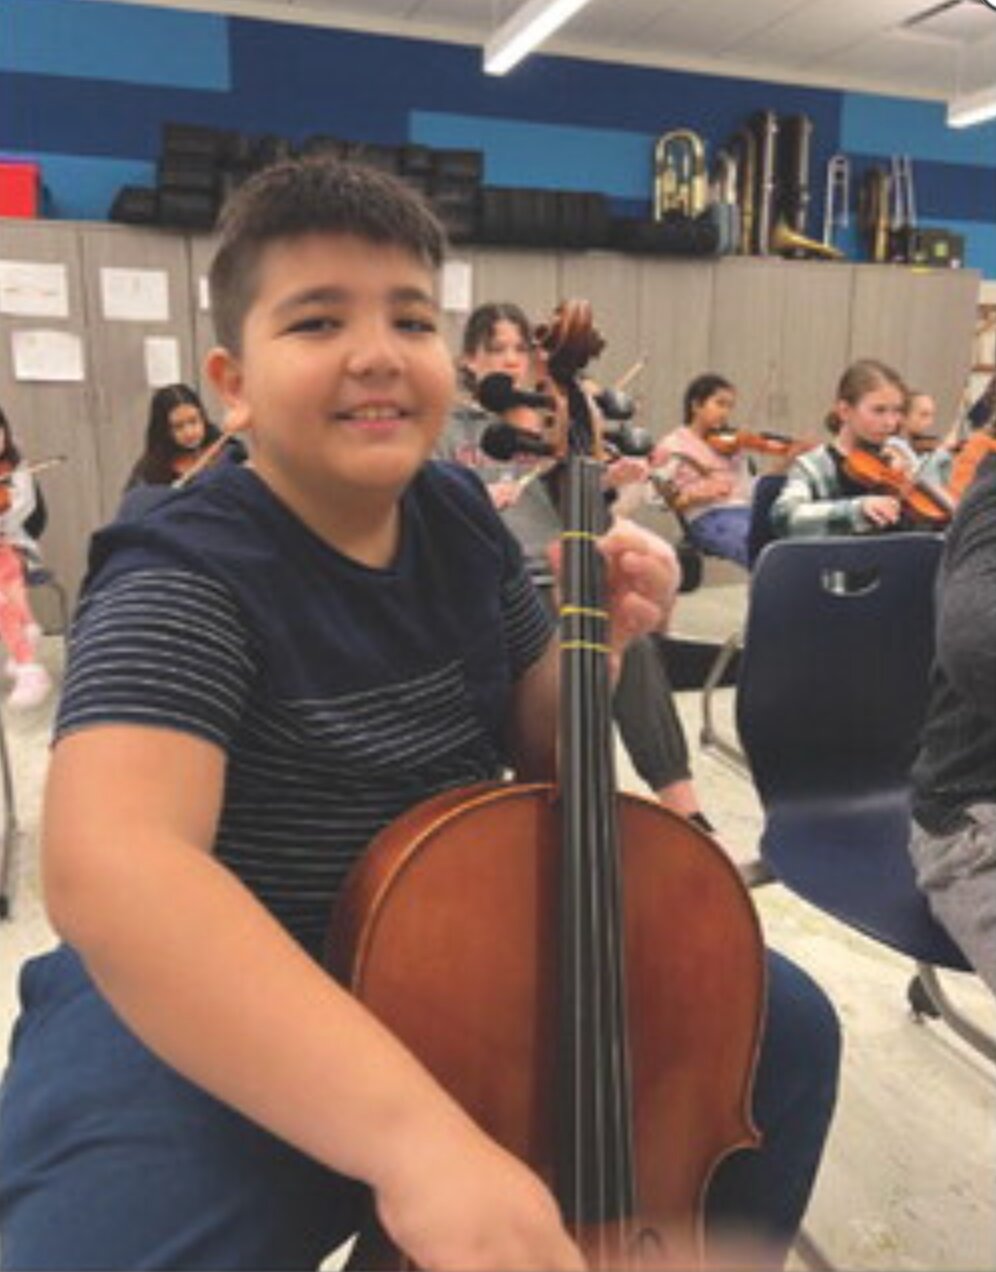 Kids can play the cello, viola, violin or double bass.